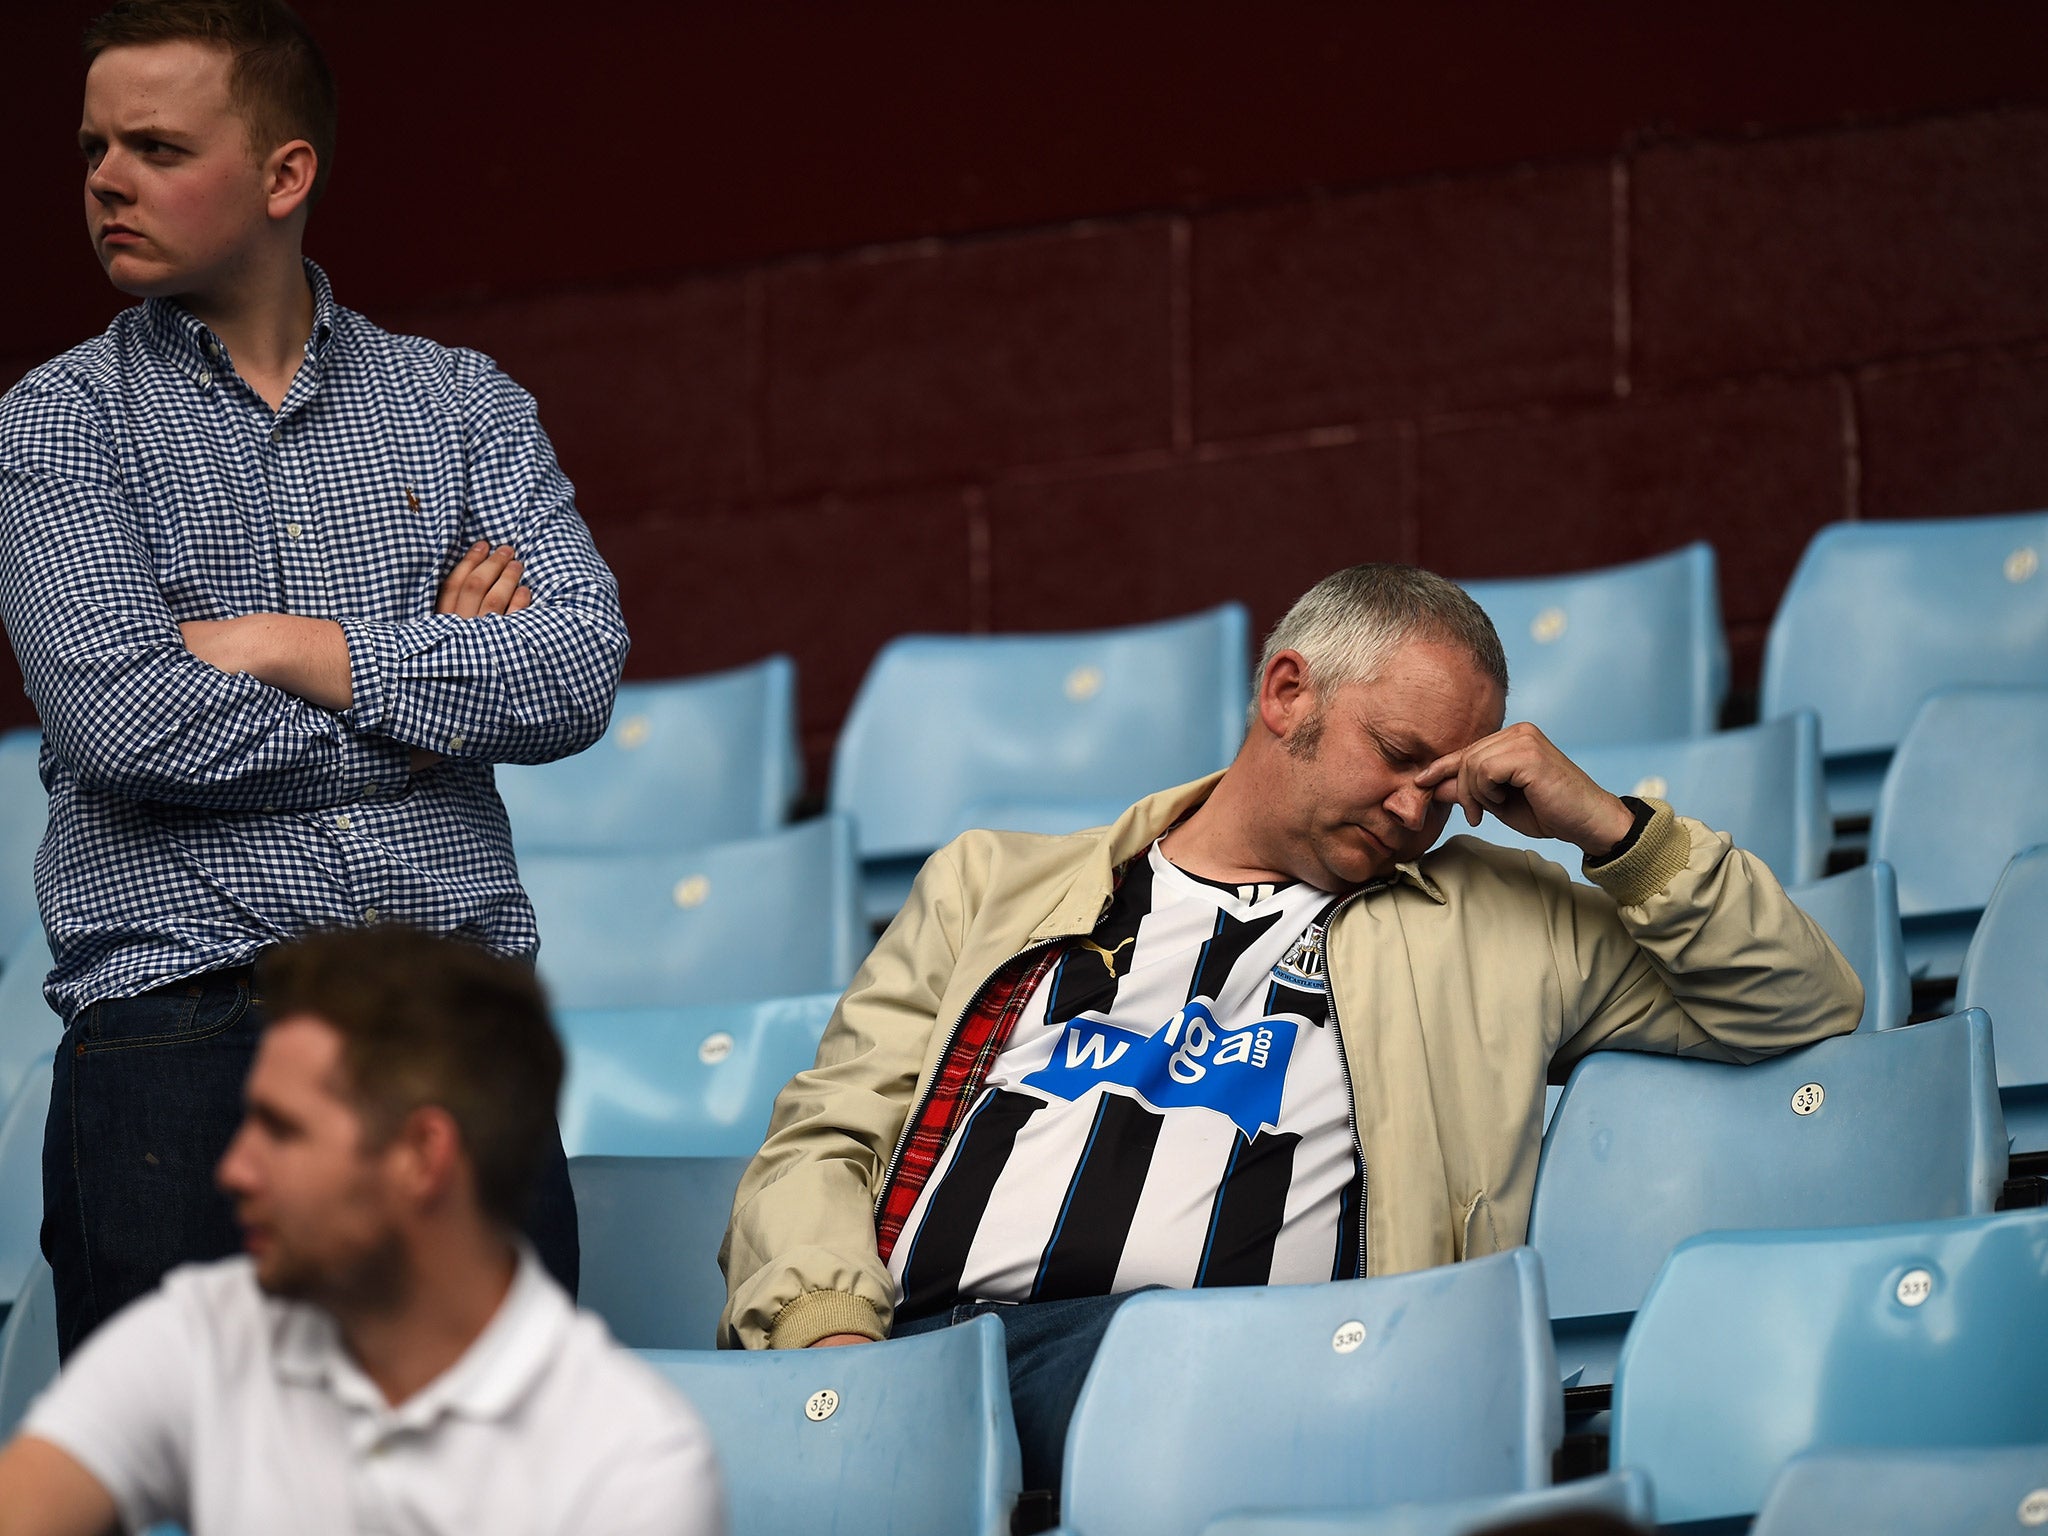 A Newcastle fan reacts to the 0-0 draw with Aston Villa